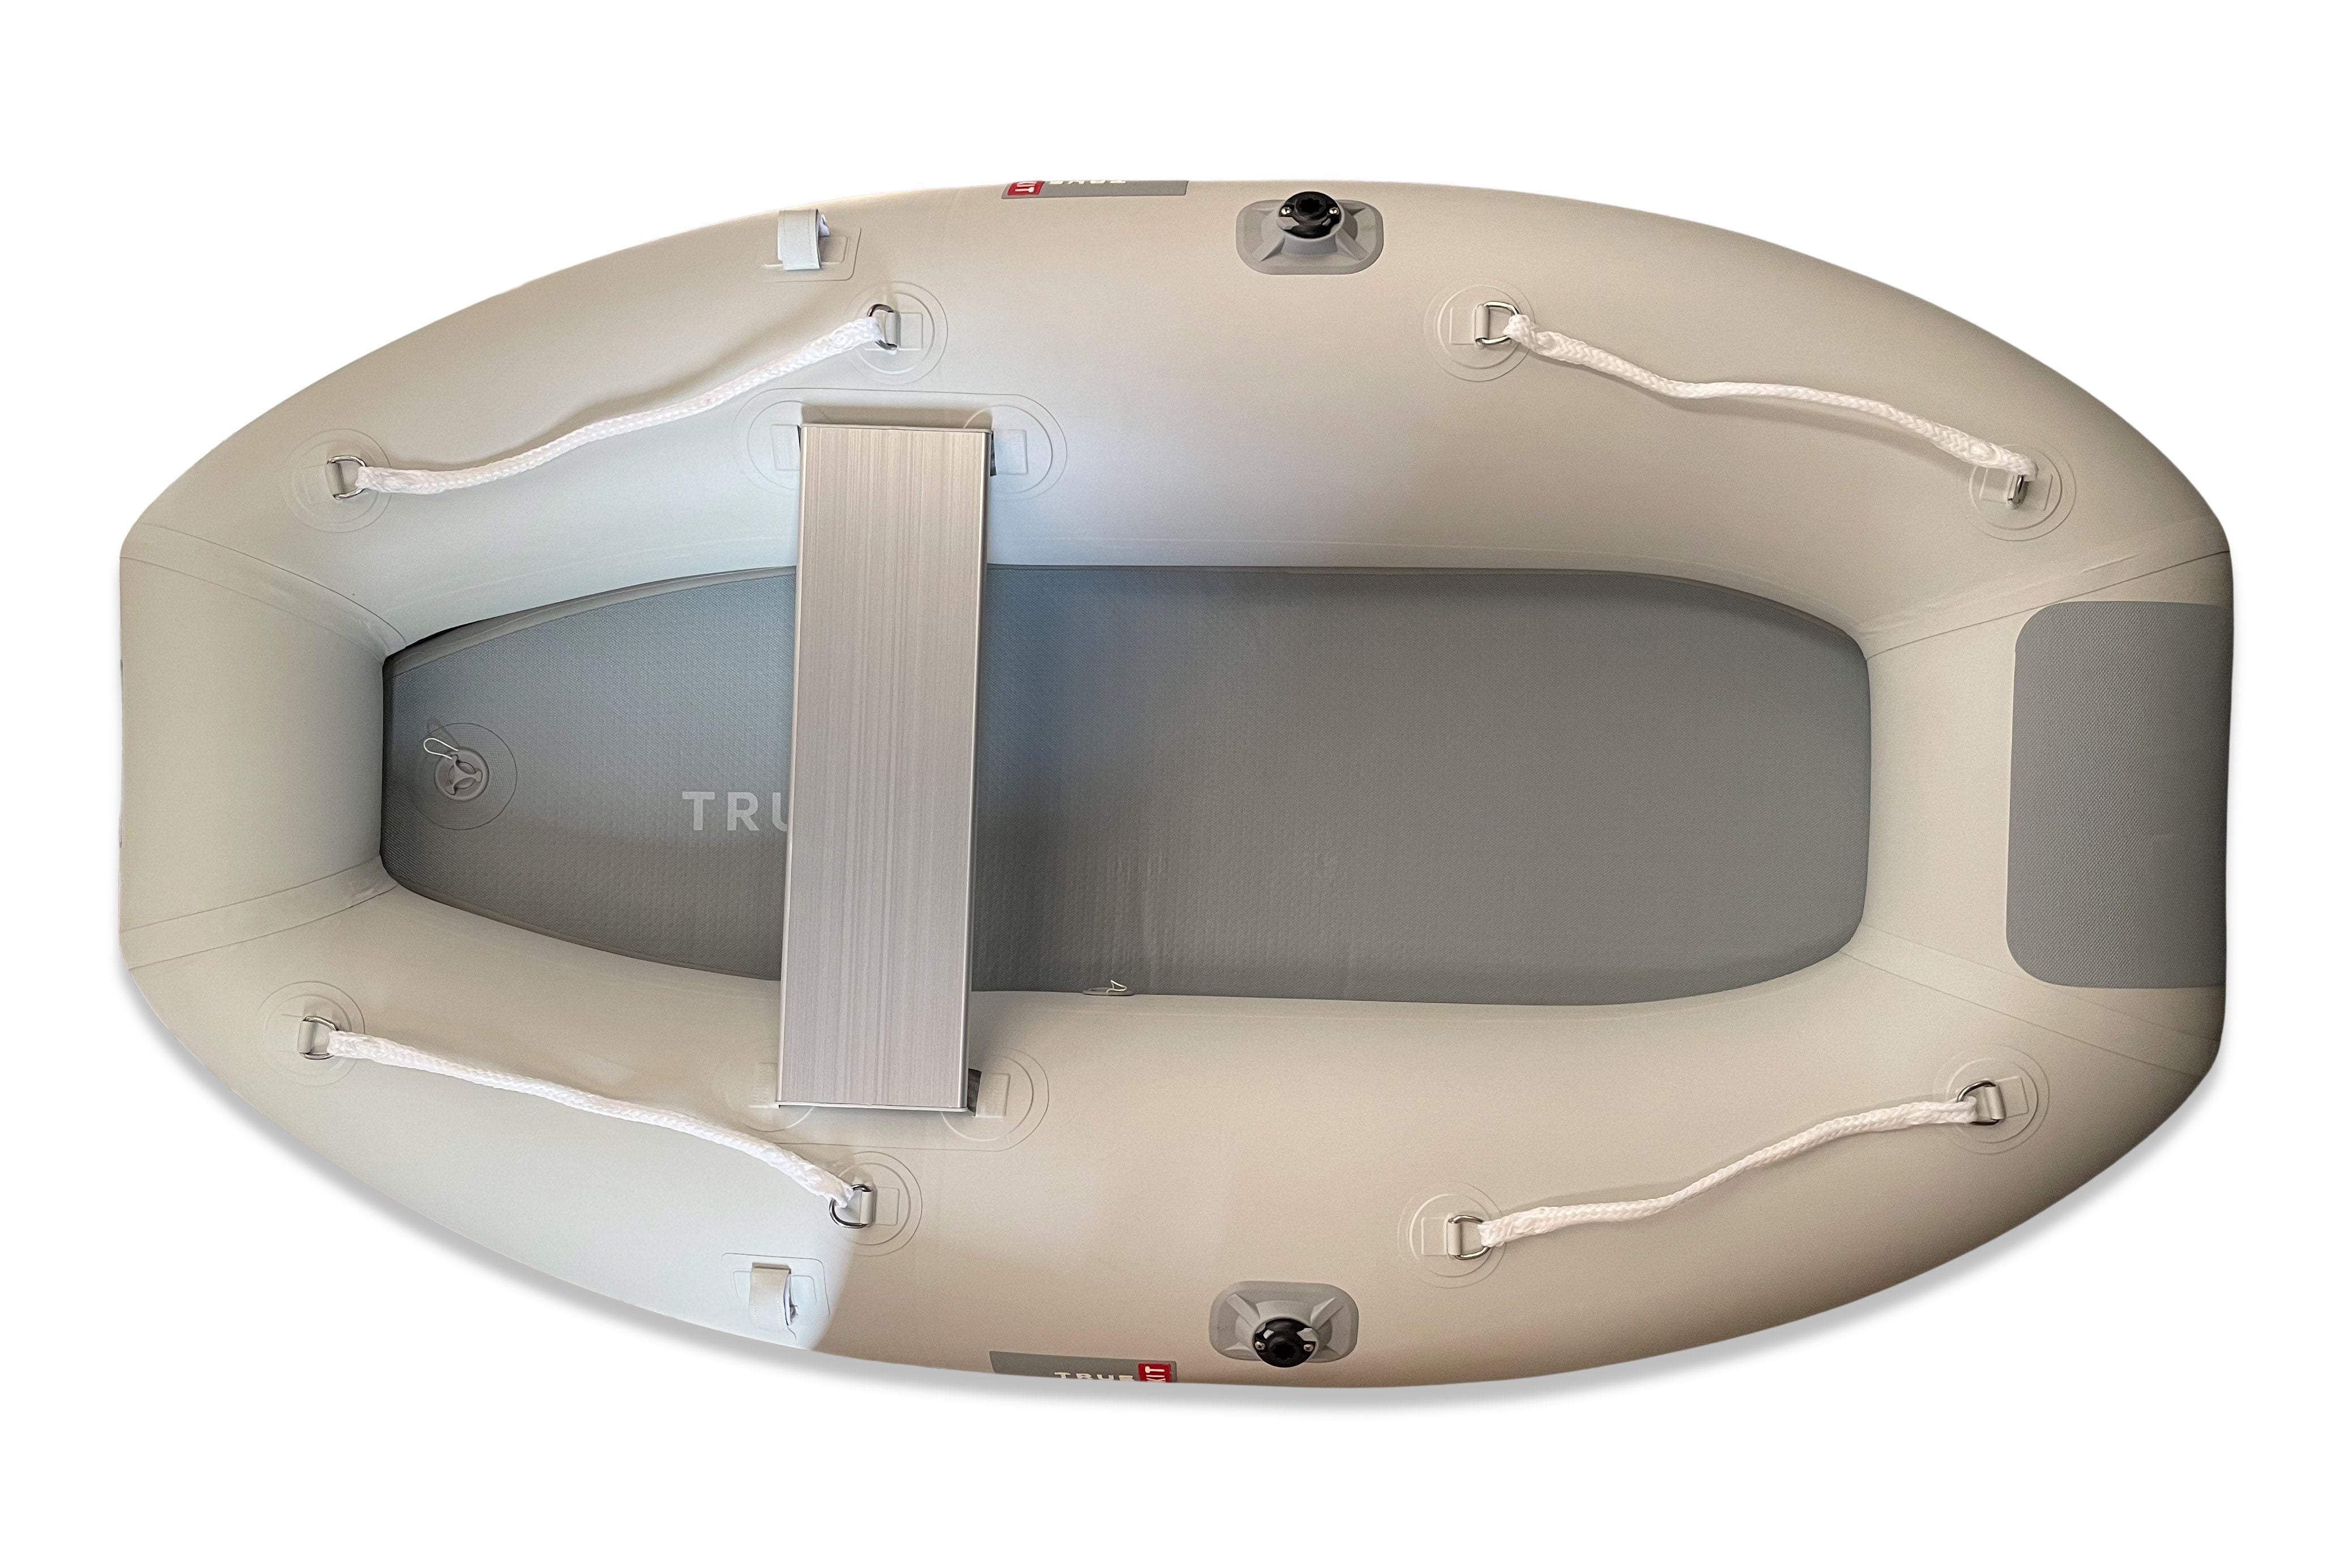 The Stowaway: Small Inflatable Row Boat